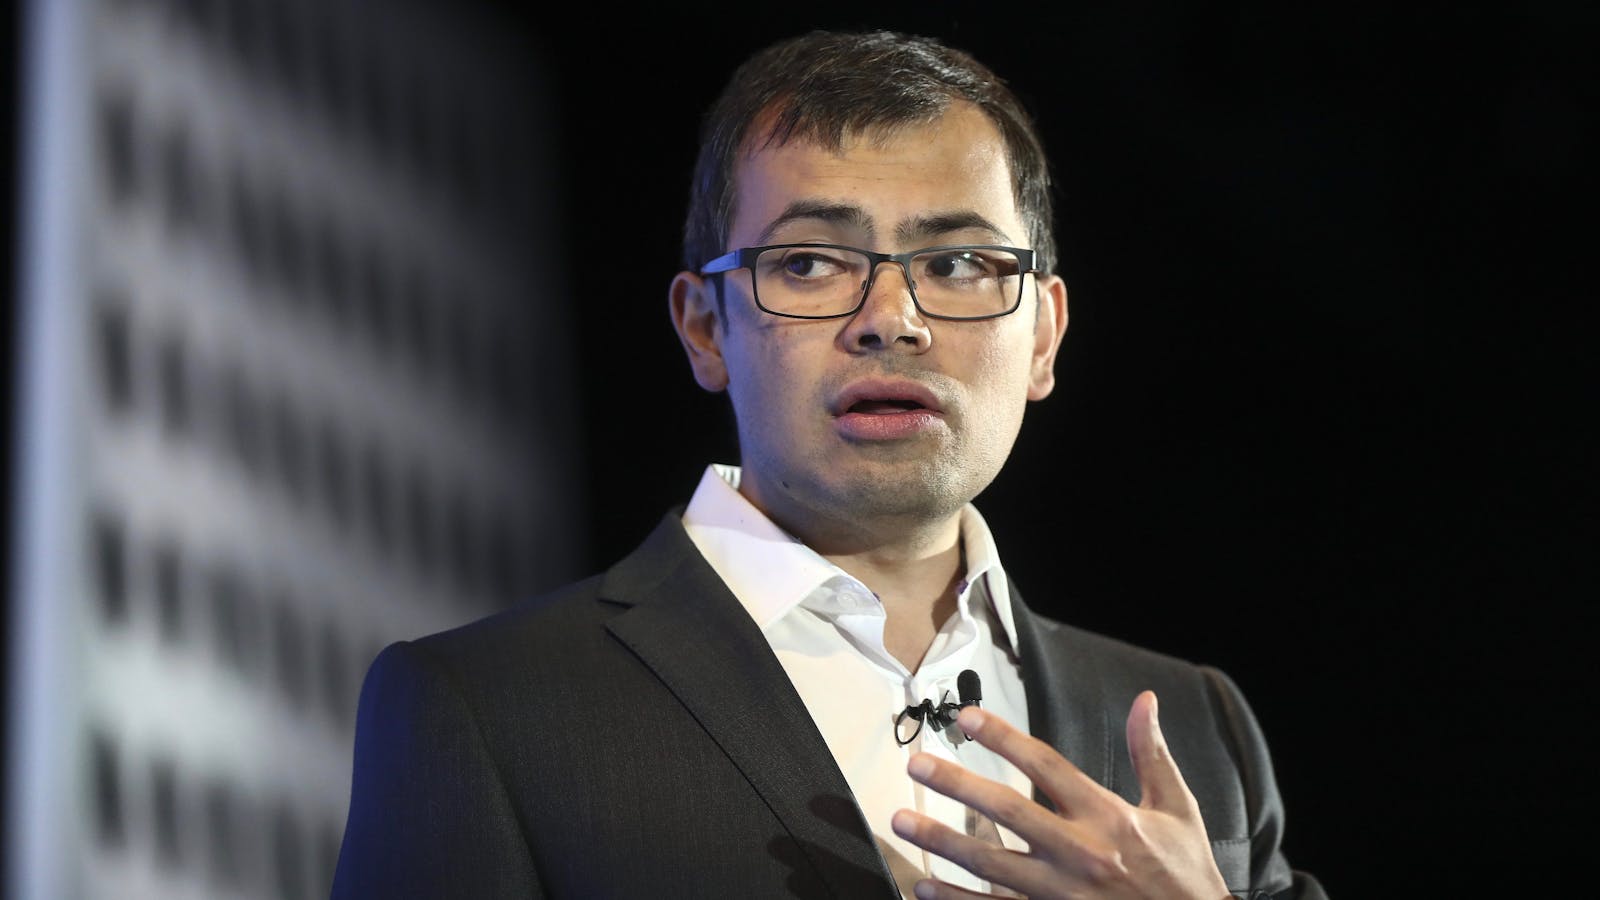 DeepMind CEO Demis Hassabis. Photo by Bloomberg.